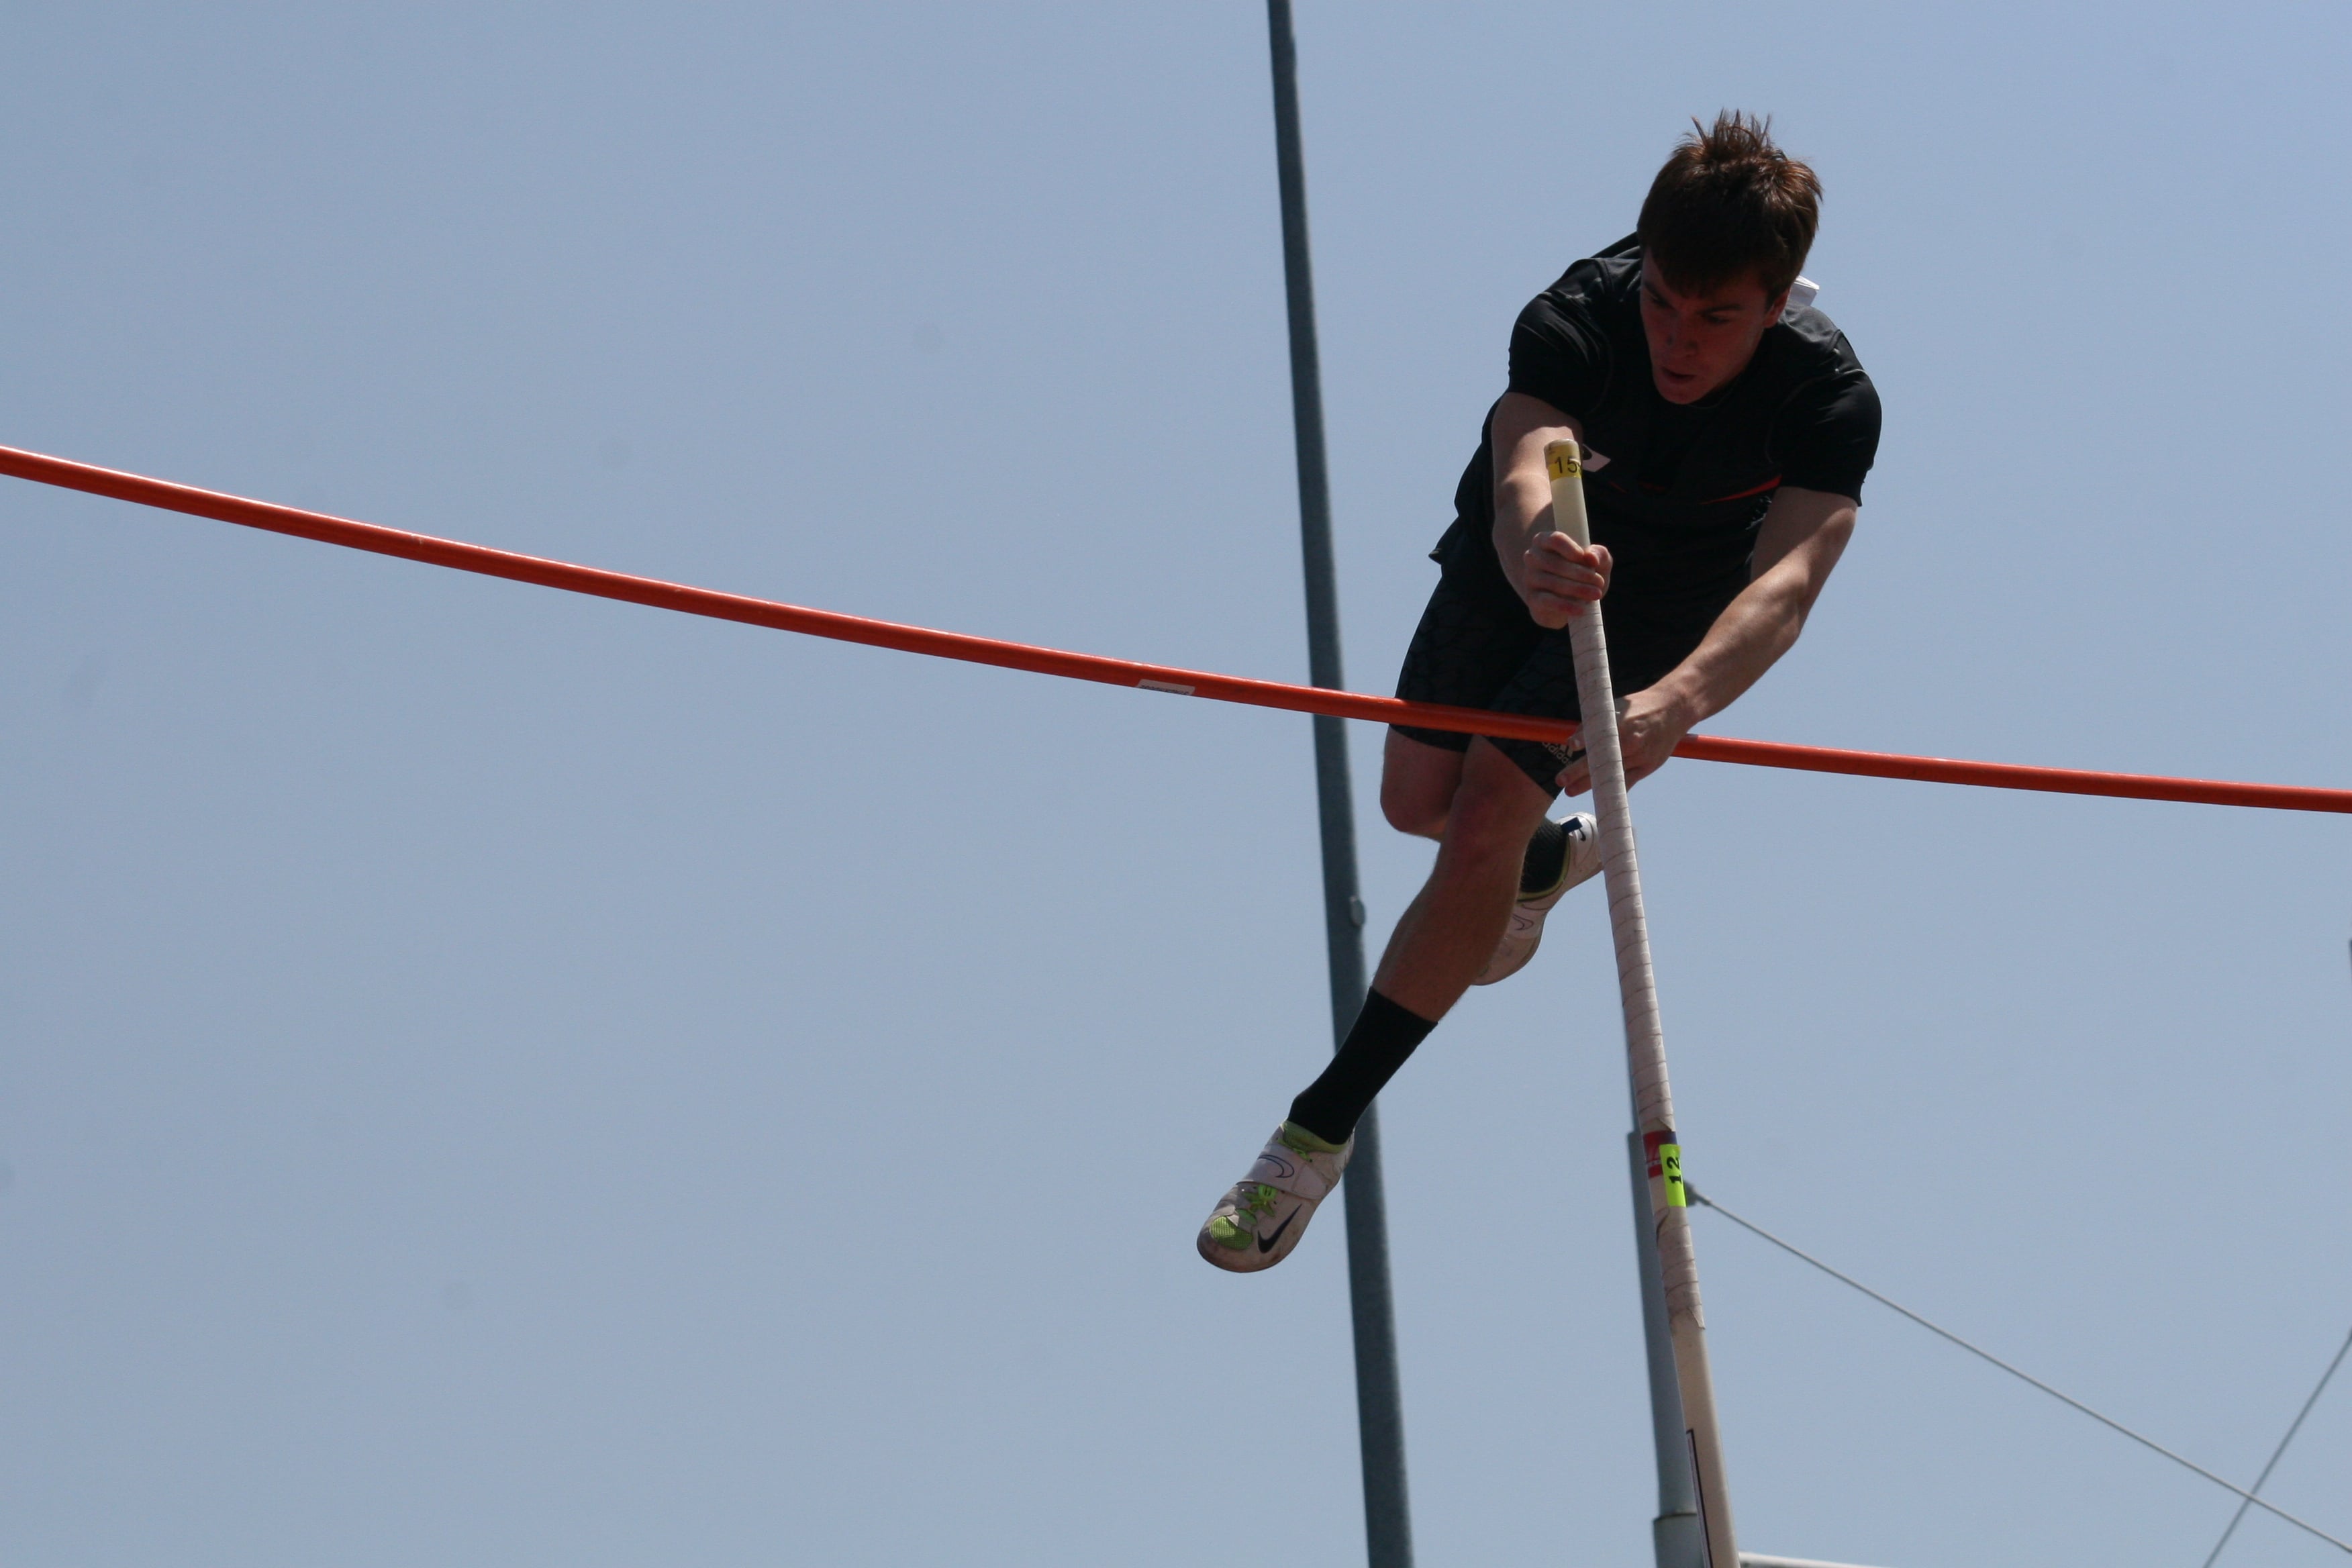 Adam Thomas lets go of the pole after he clears the bar.